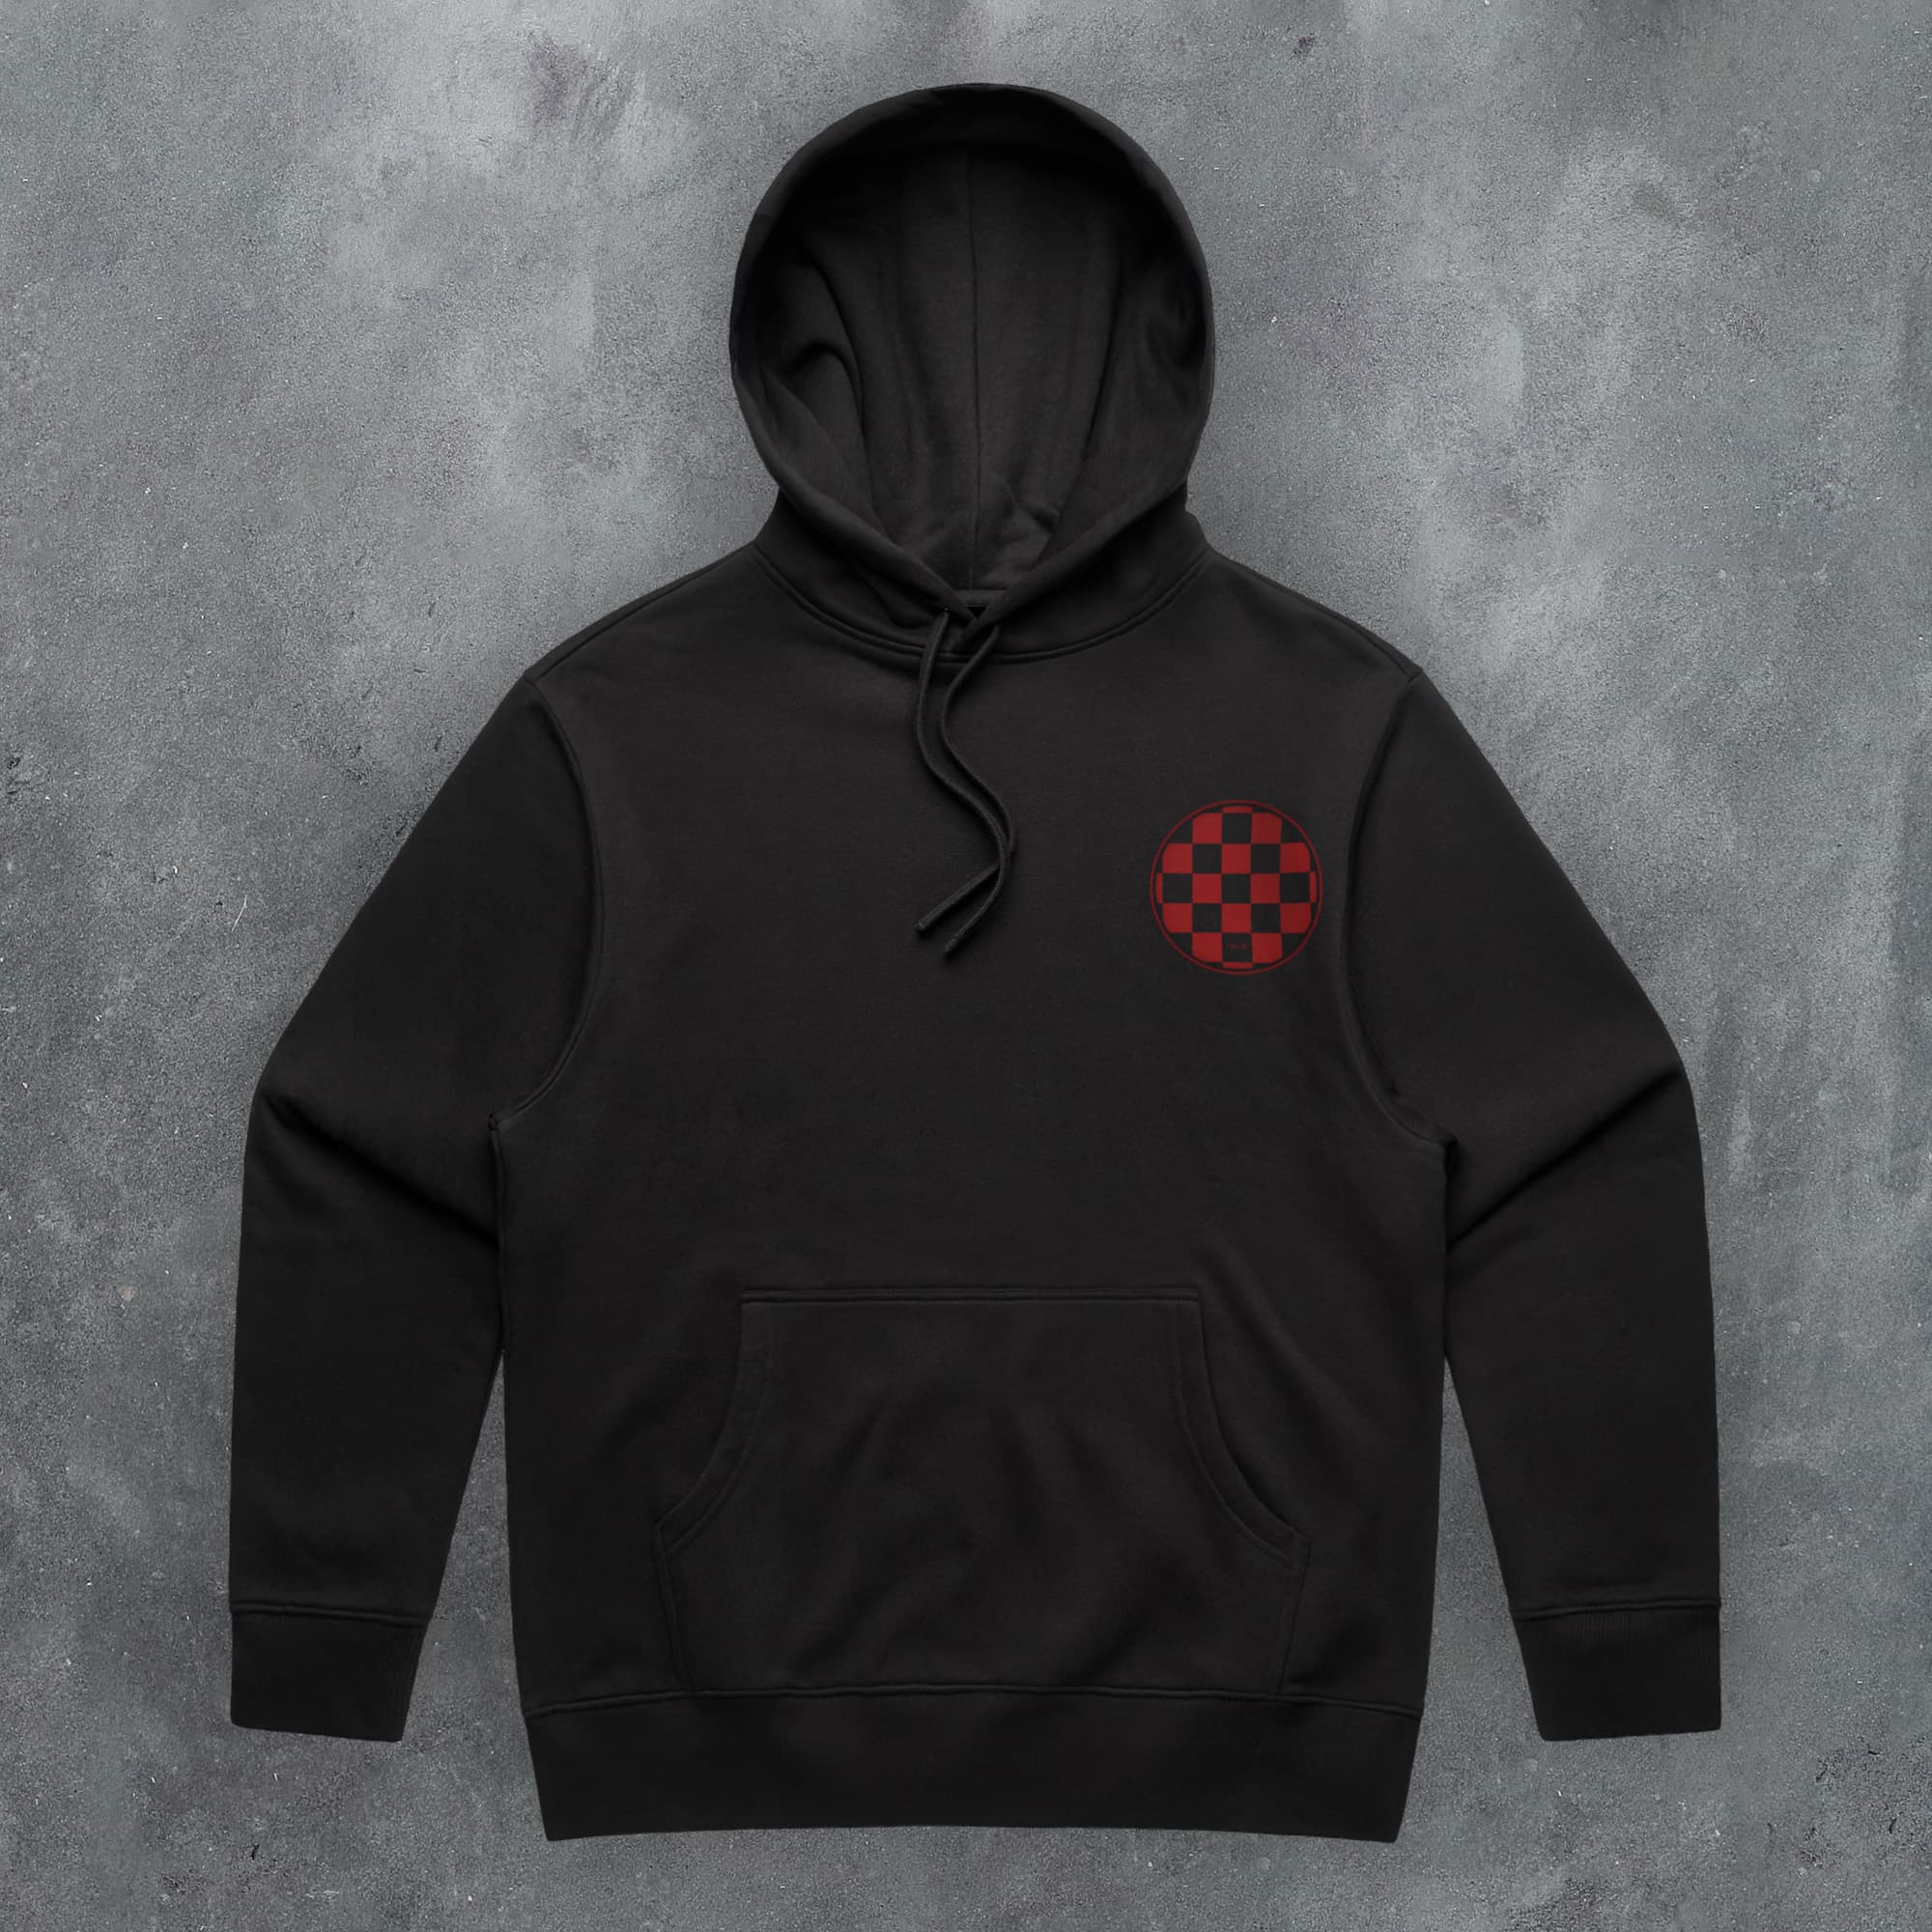 a black hoodie with a red checkered design on it